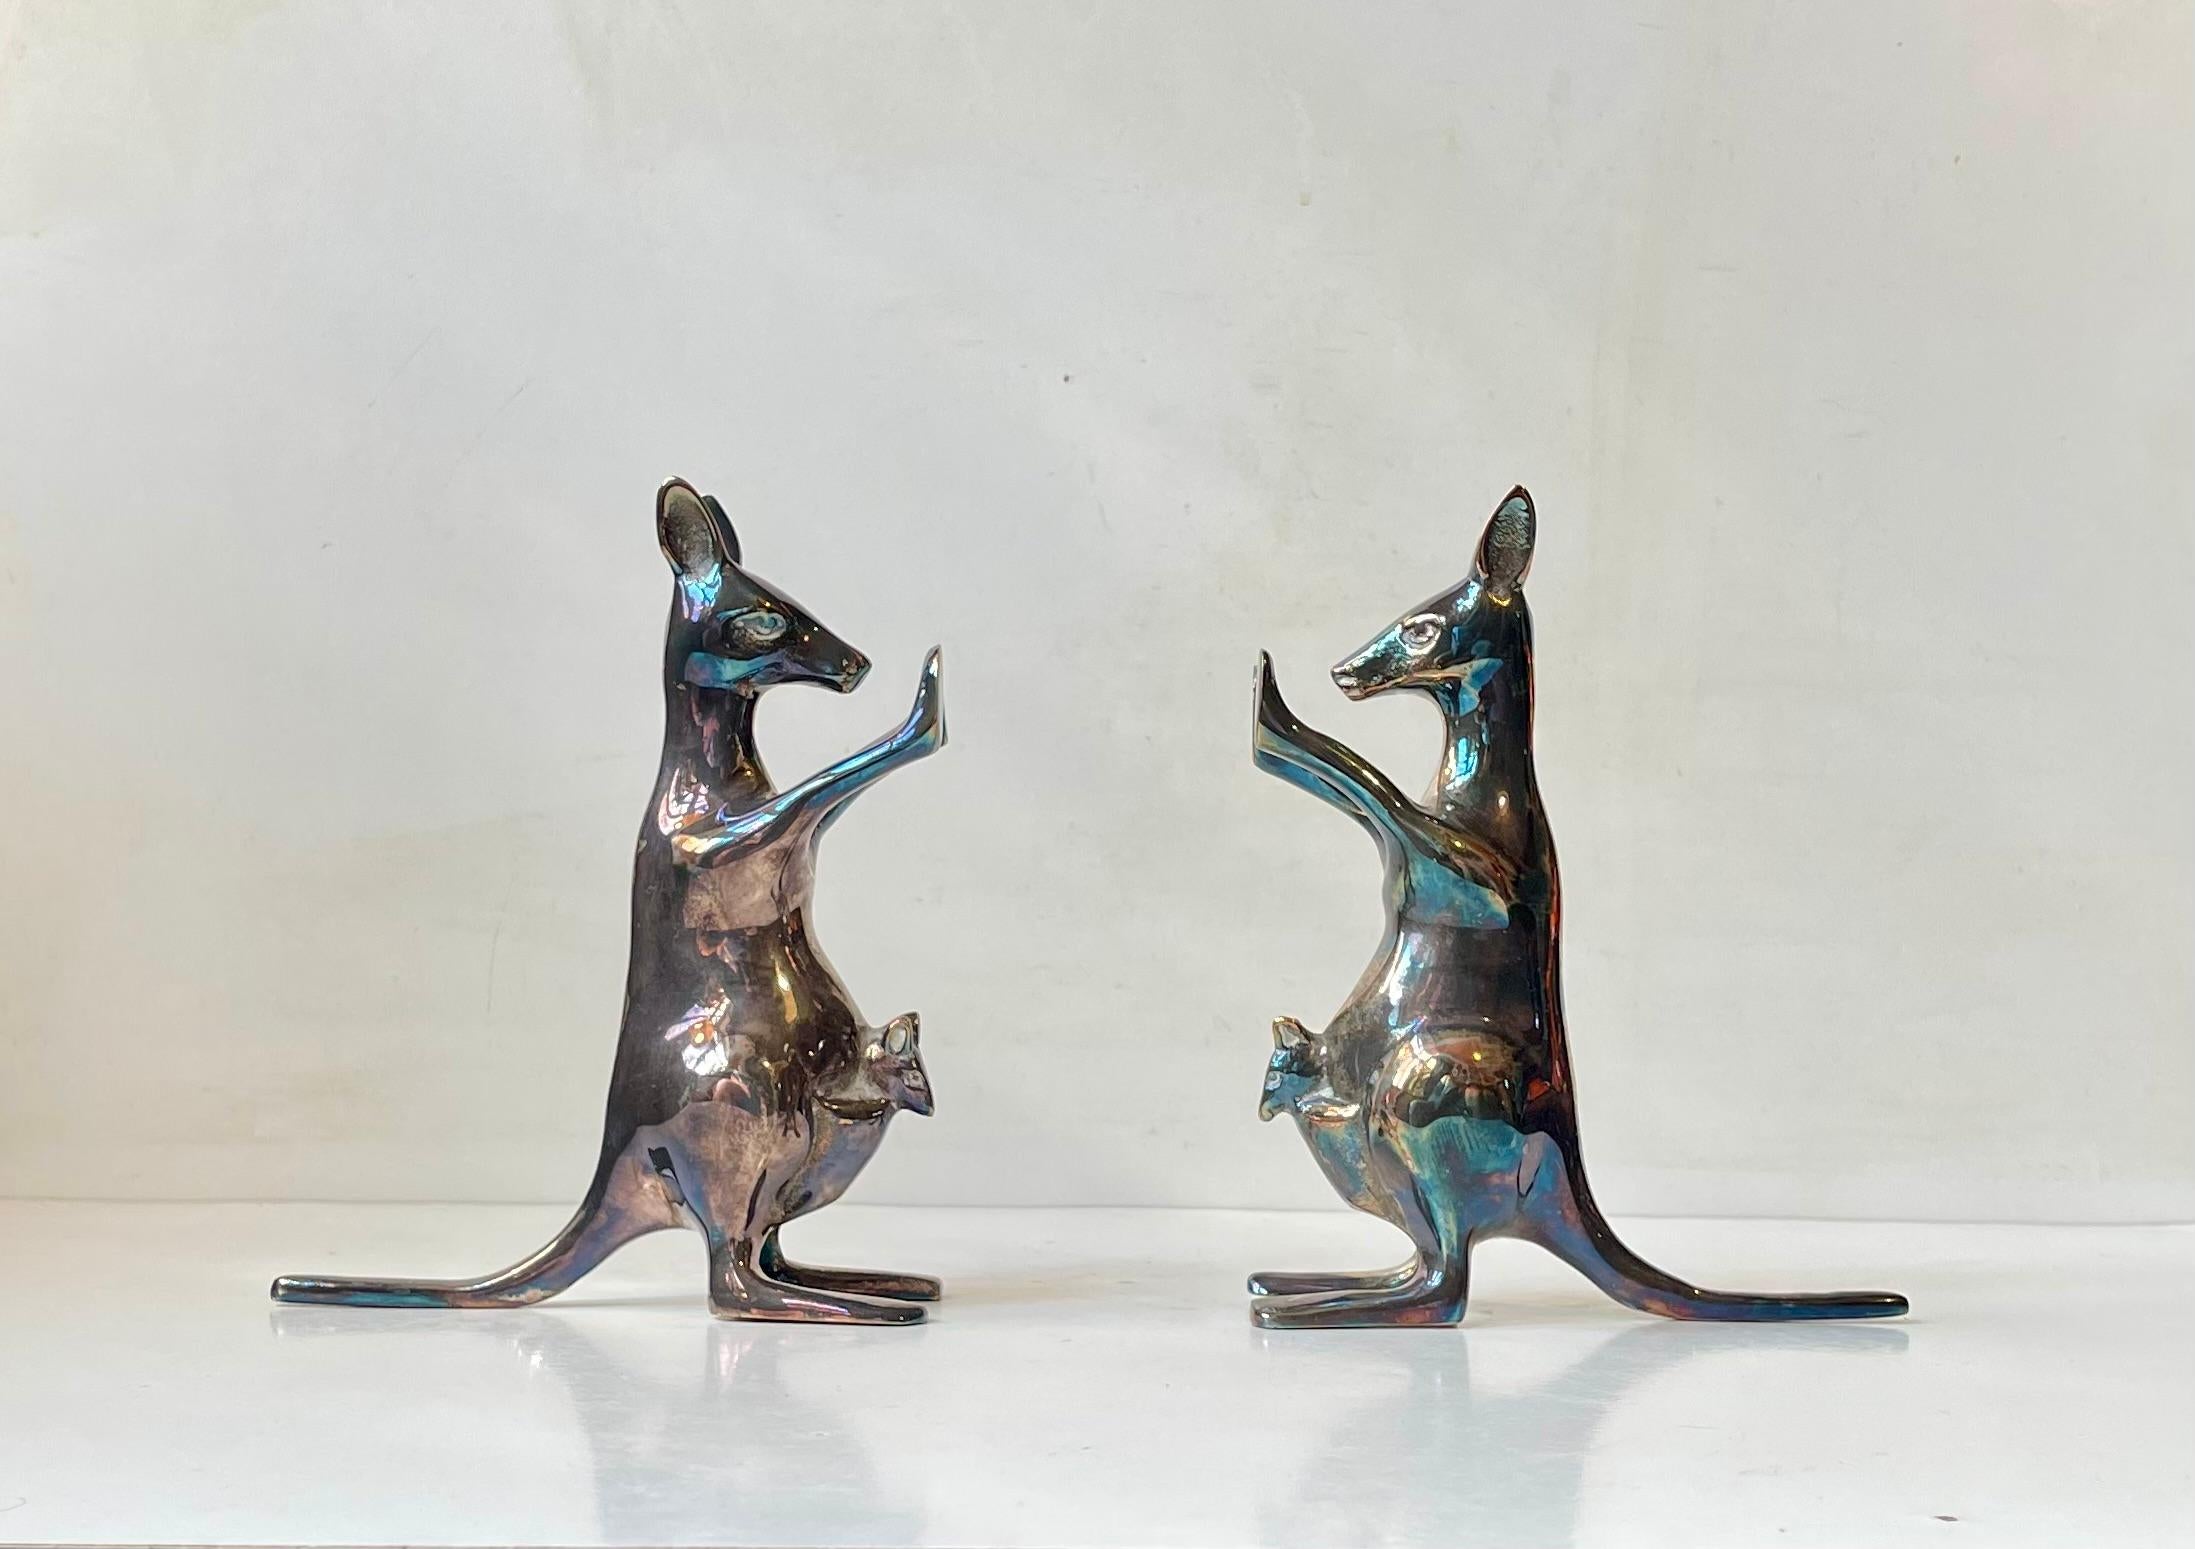 Decorative pair of rare mother kangaroo bookends with Joey's/babies. Made from silver plated brass. They have developed a unique rainbow-like patina over the years but obviously can be polished to a more classic silver shine. Unknown European maker